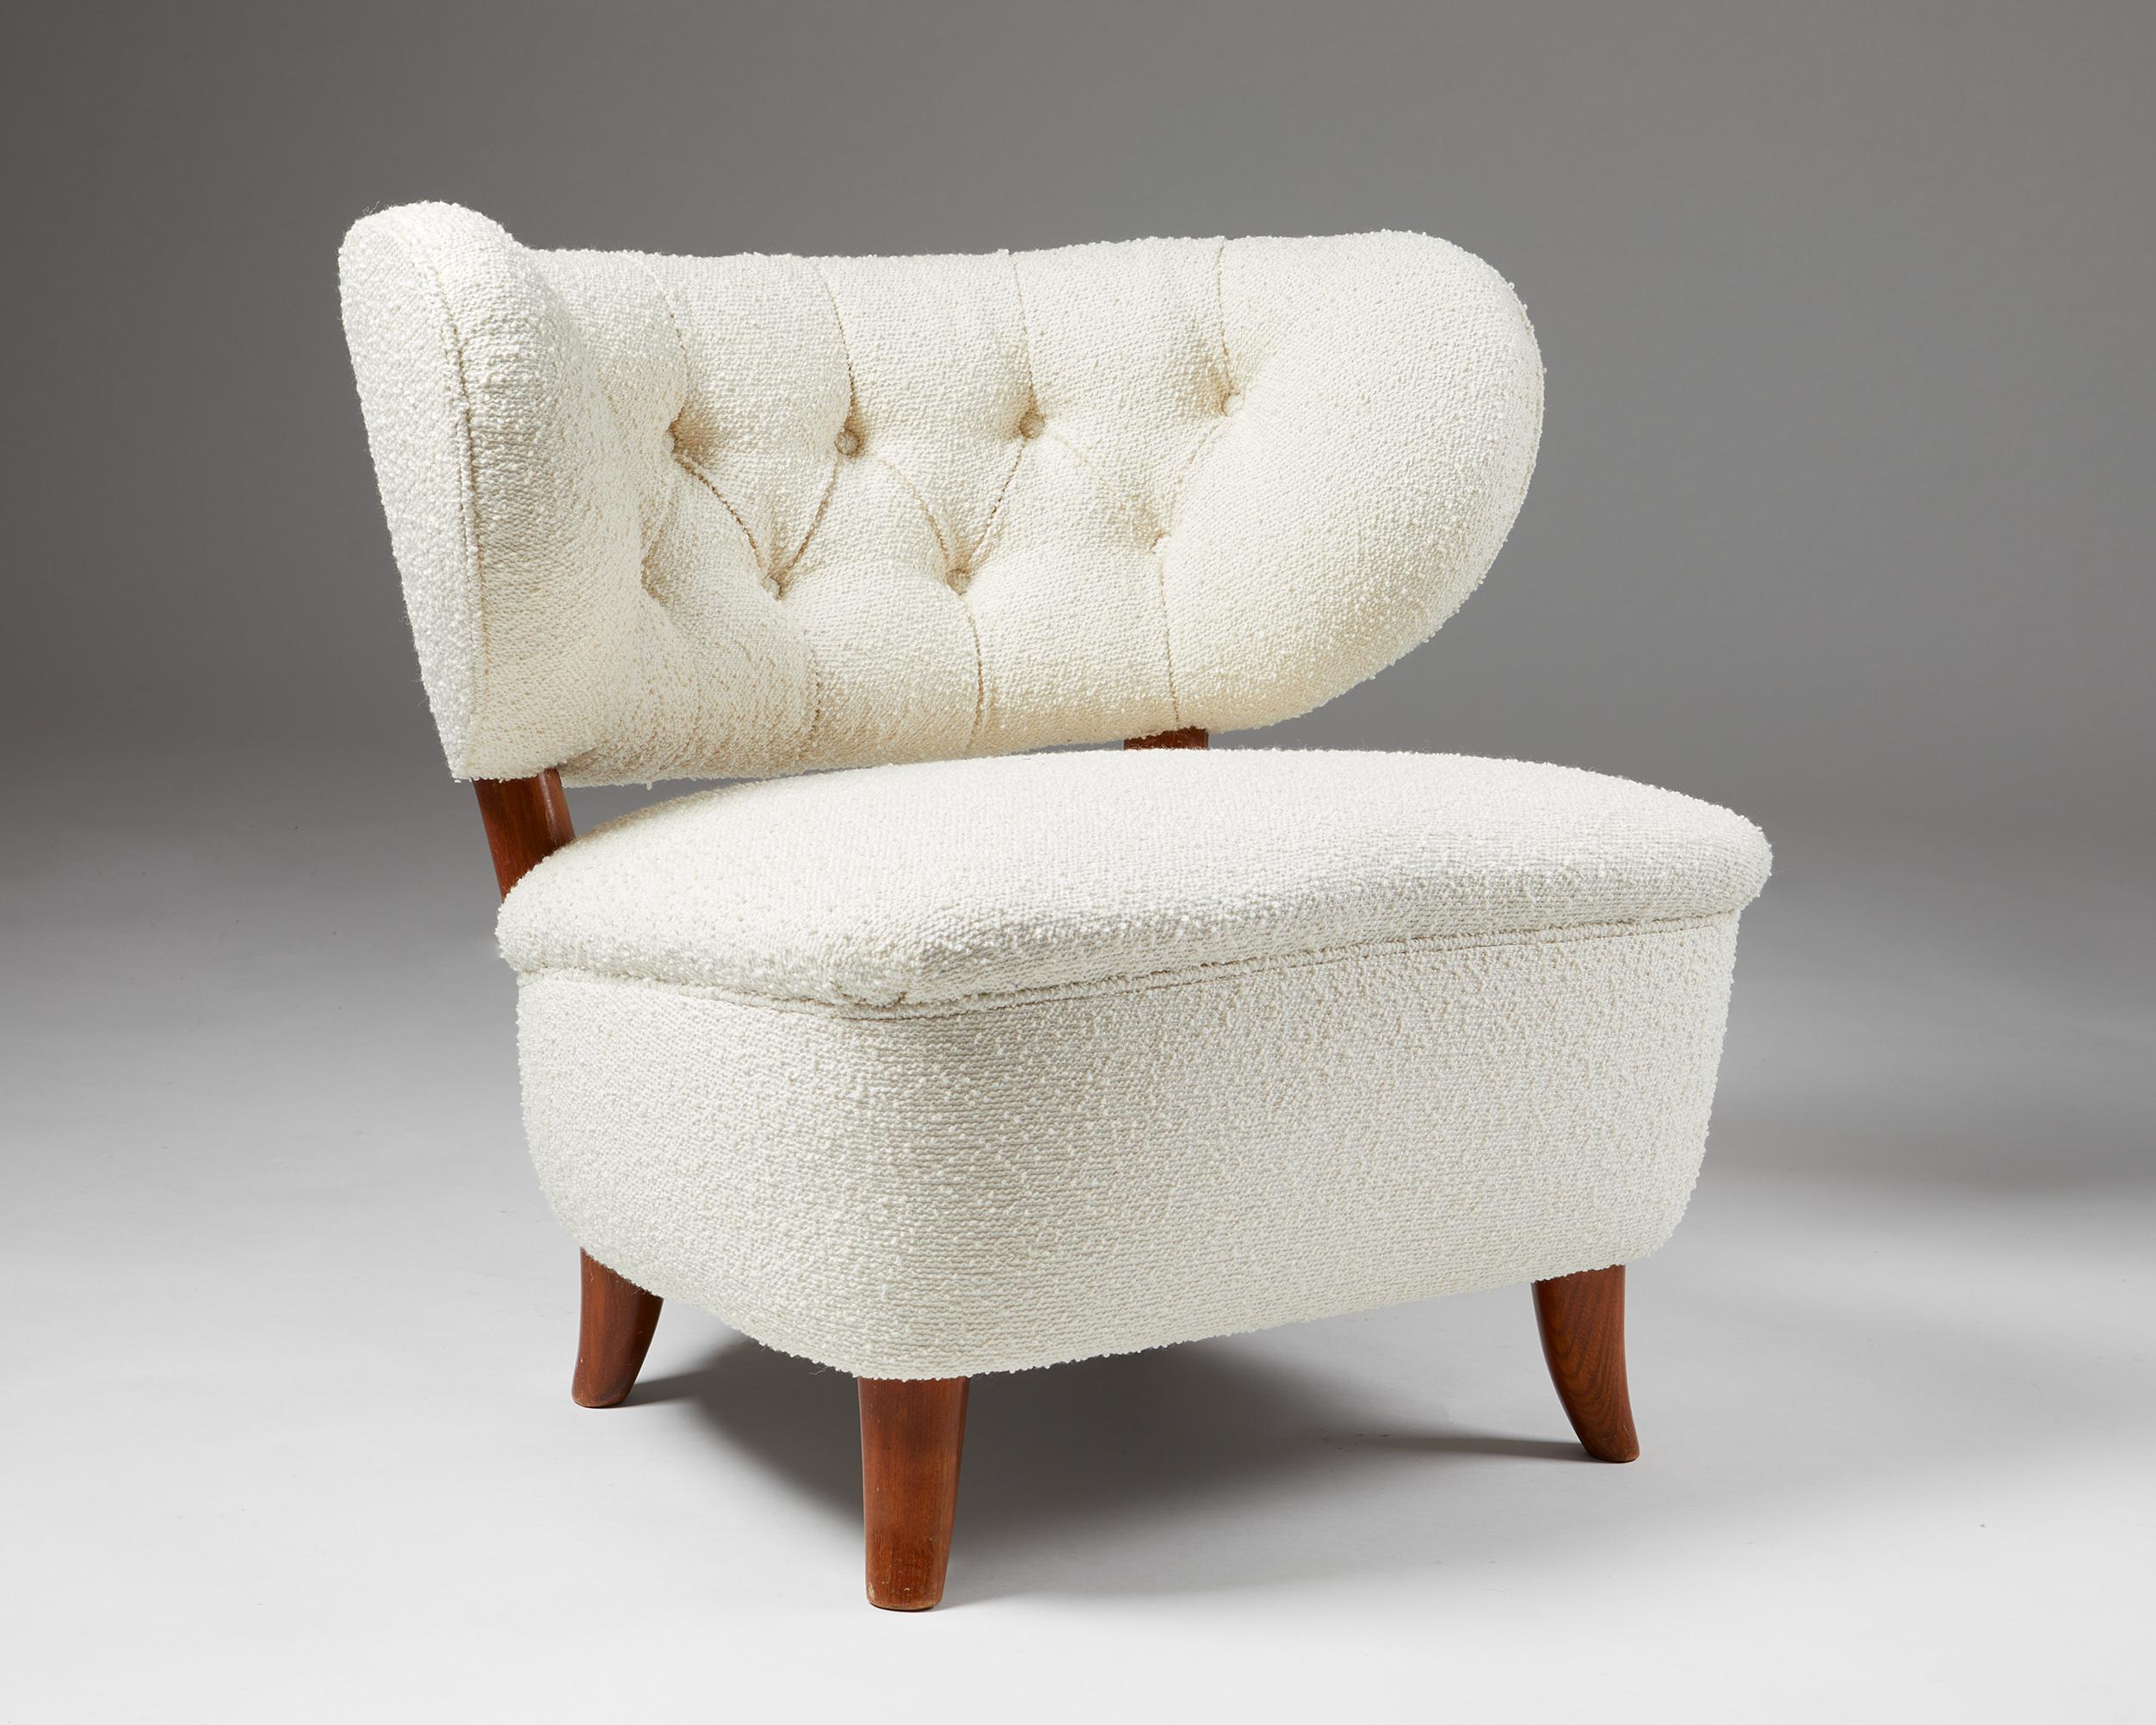 Easy chair designed by Otto Shulz, for Boet,
Sweden. 1940s.

Wool upholstery and lacquered wood.

Measurements: 
H: 69.5 cm / 2' 3 1/4